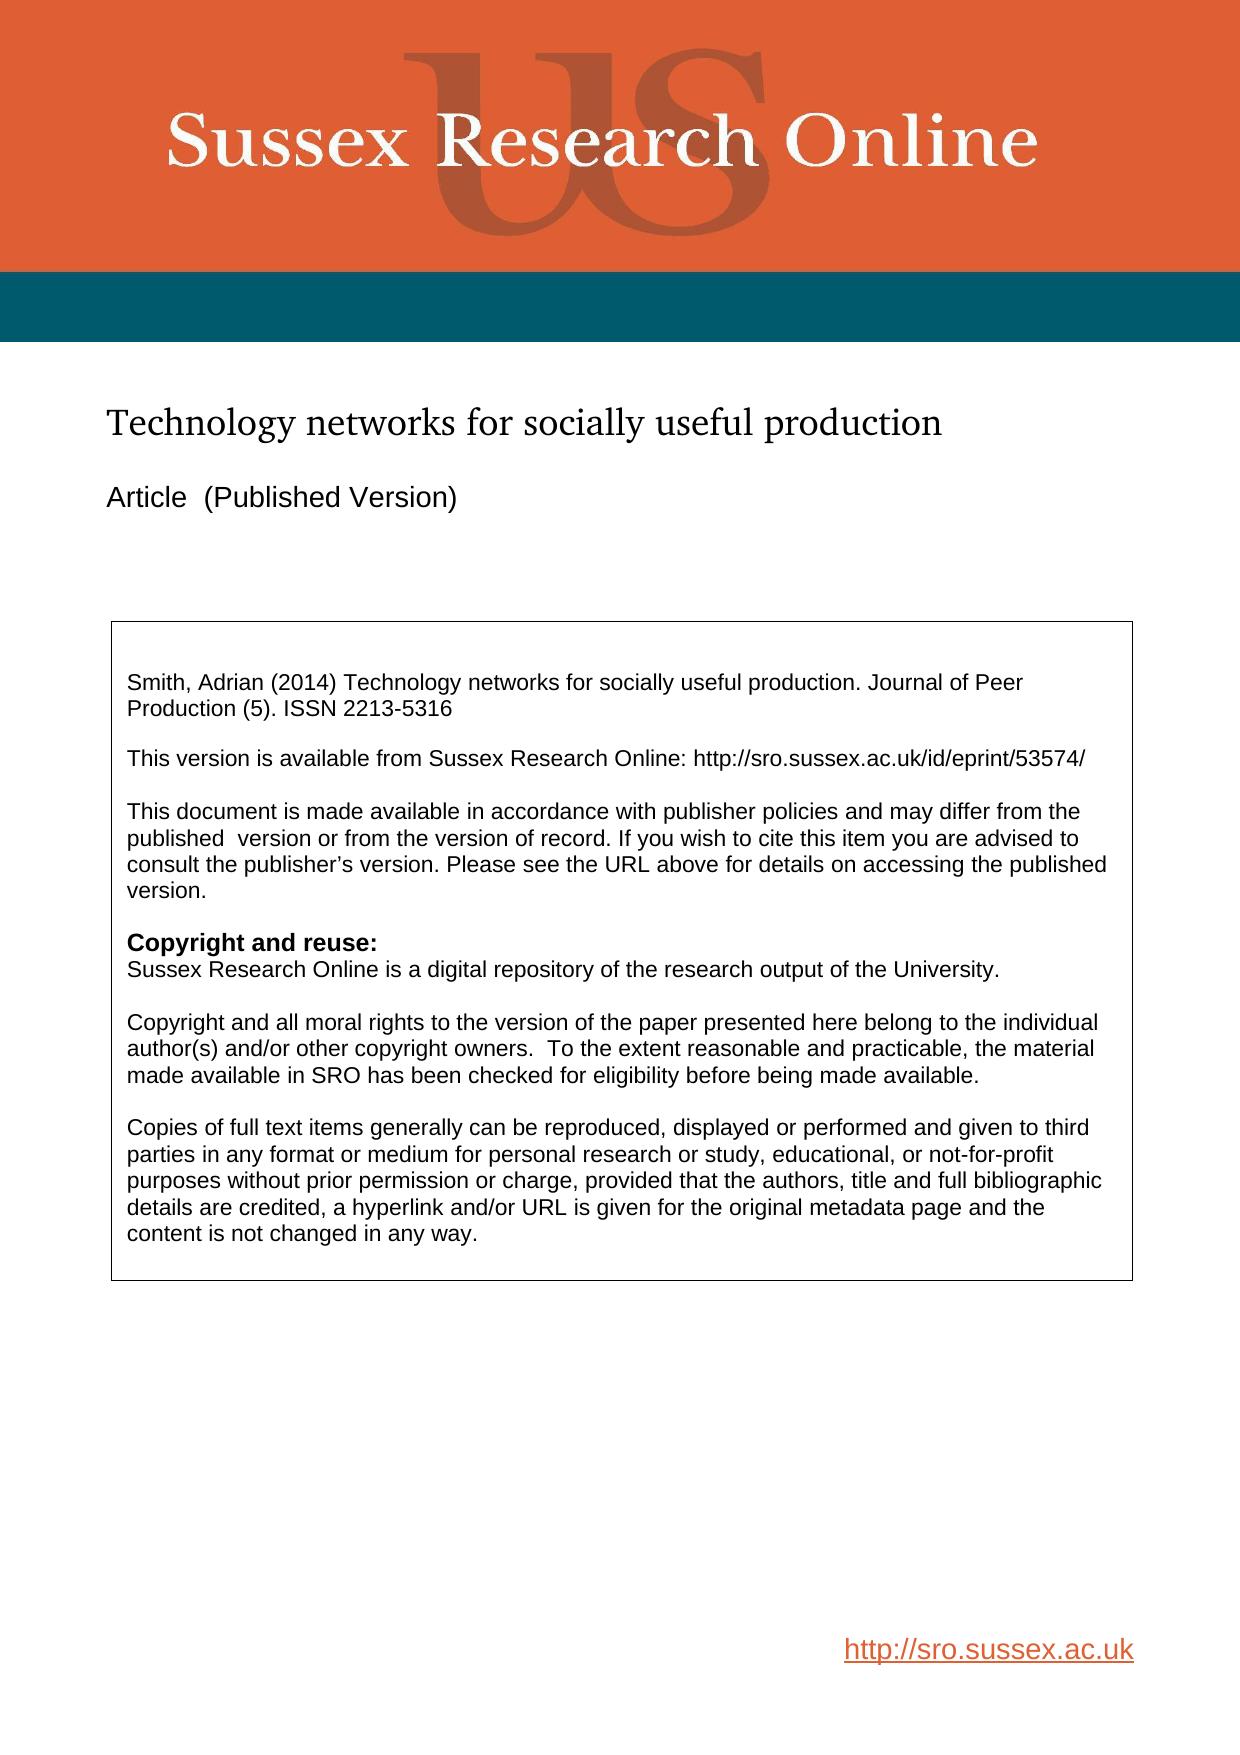 Technology networks for socially useful production